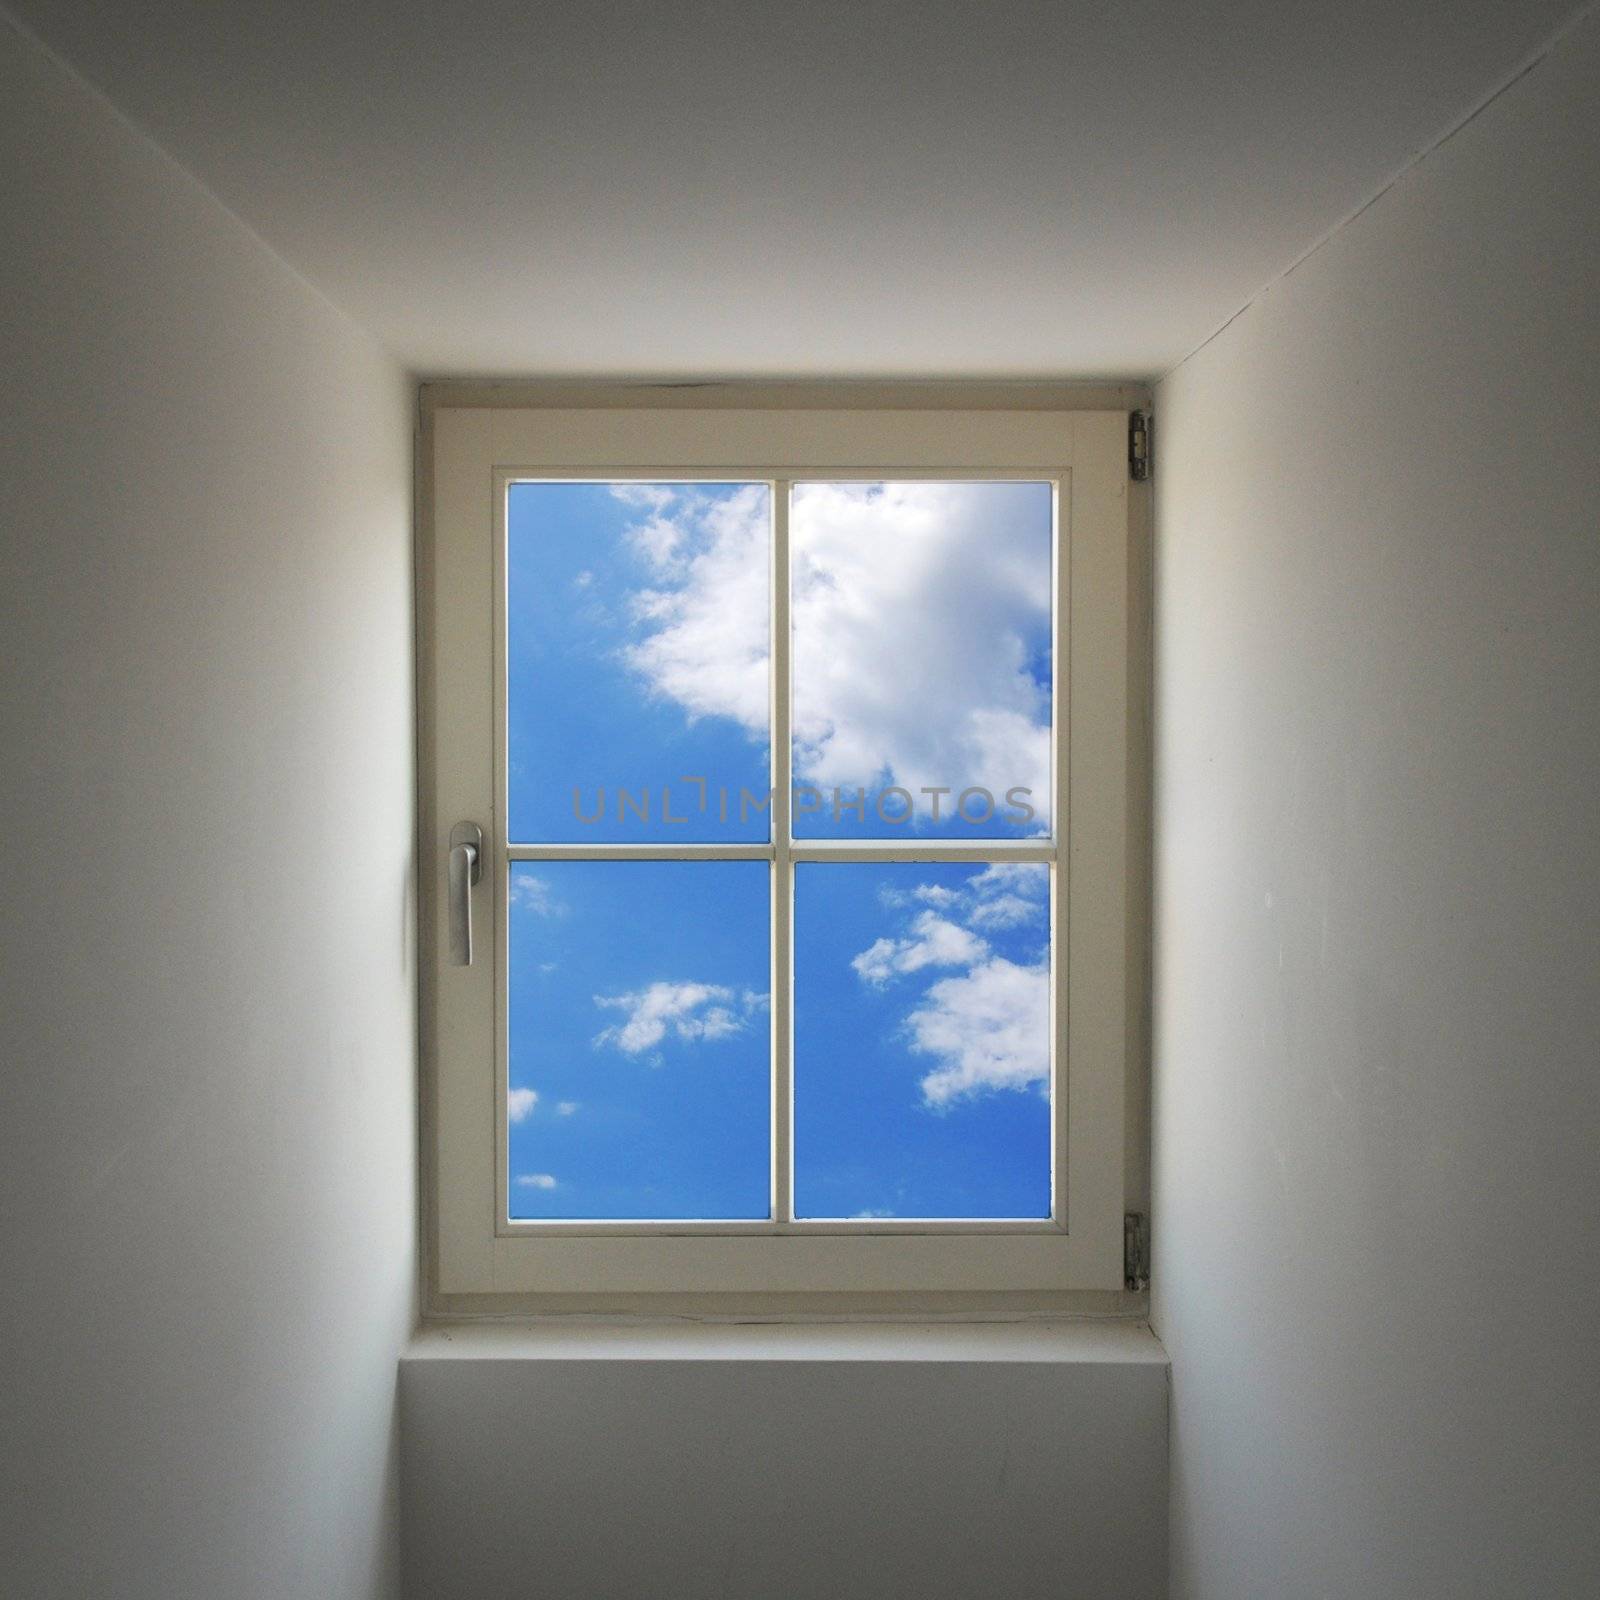 window and blue sky showing freedom concept with copyspace